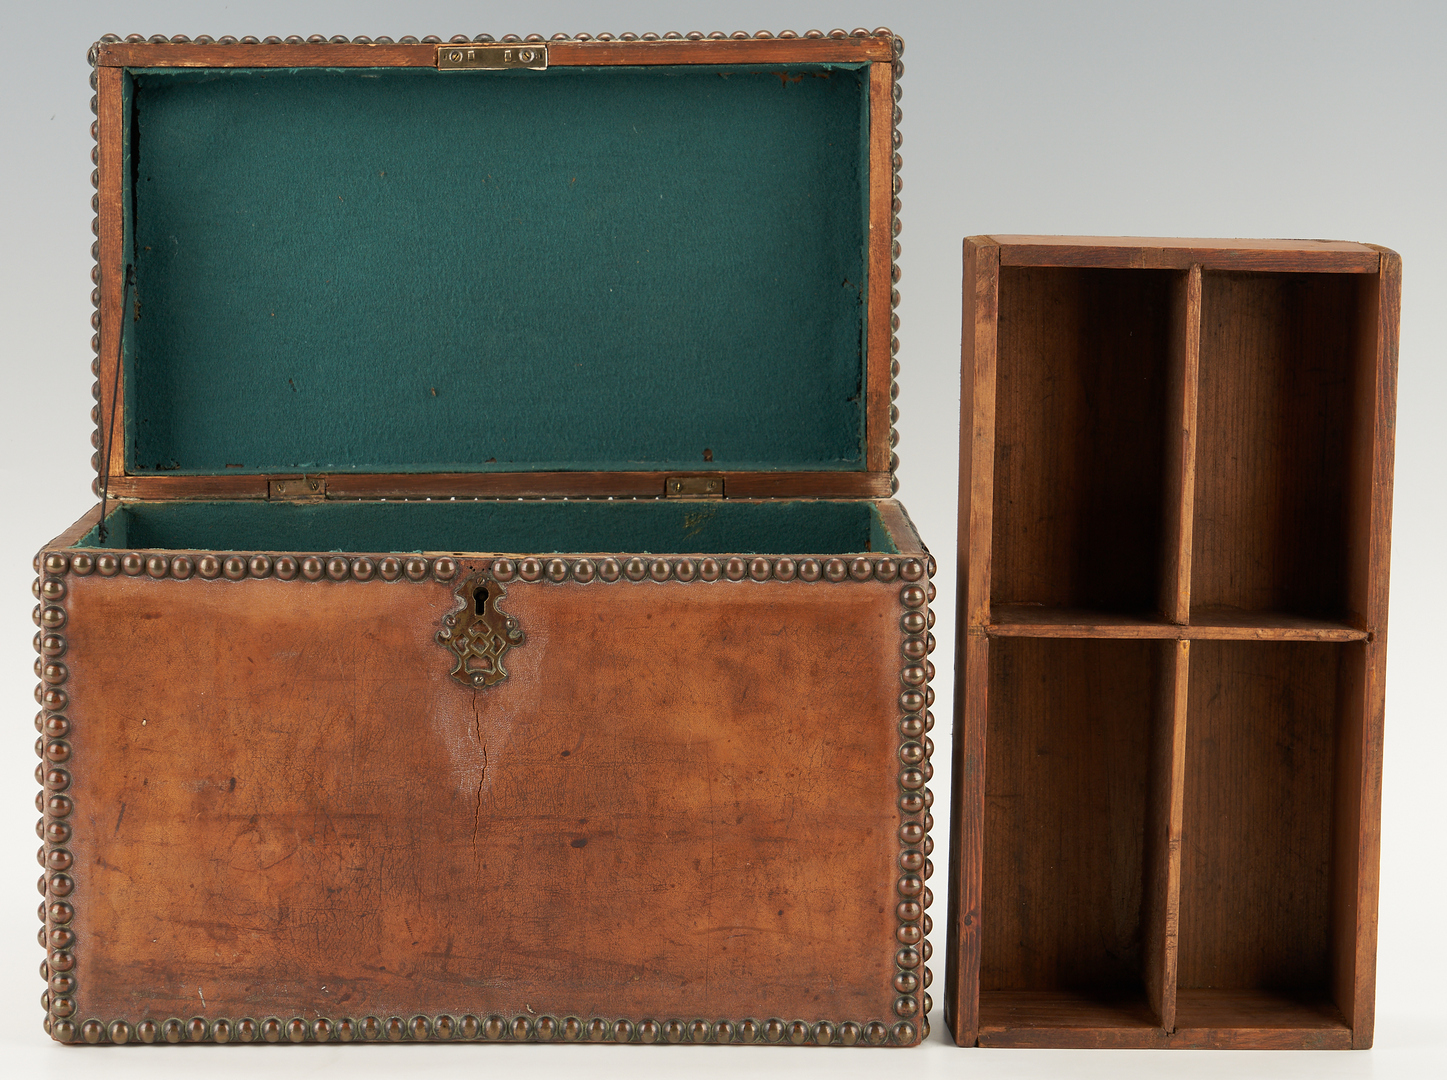 Lot 1169: European Leather Storage Box & Near East or Asian Brass Box, 2 items